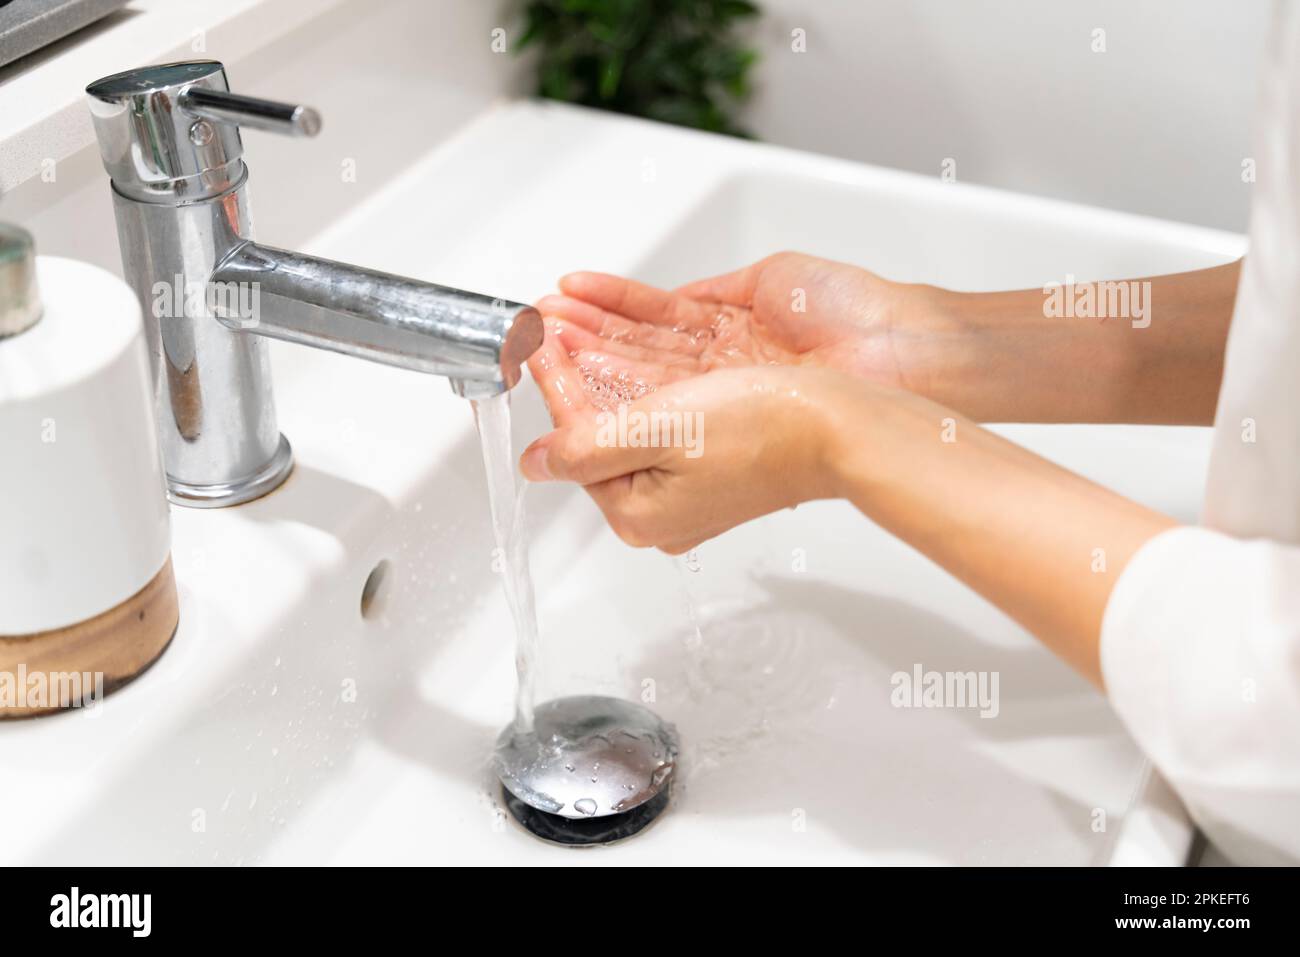 Woman's hand receiving water from a faucet Stock Photo